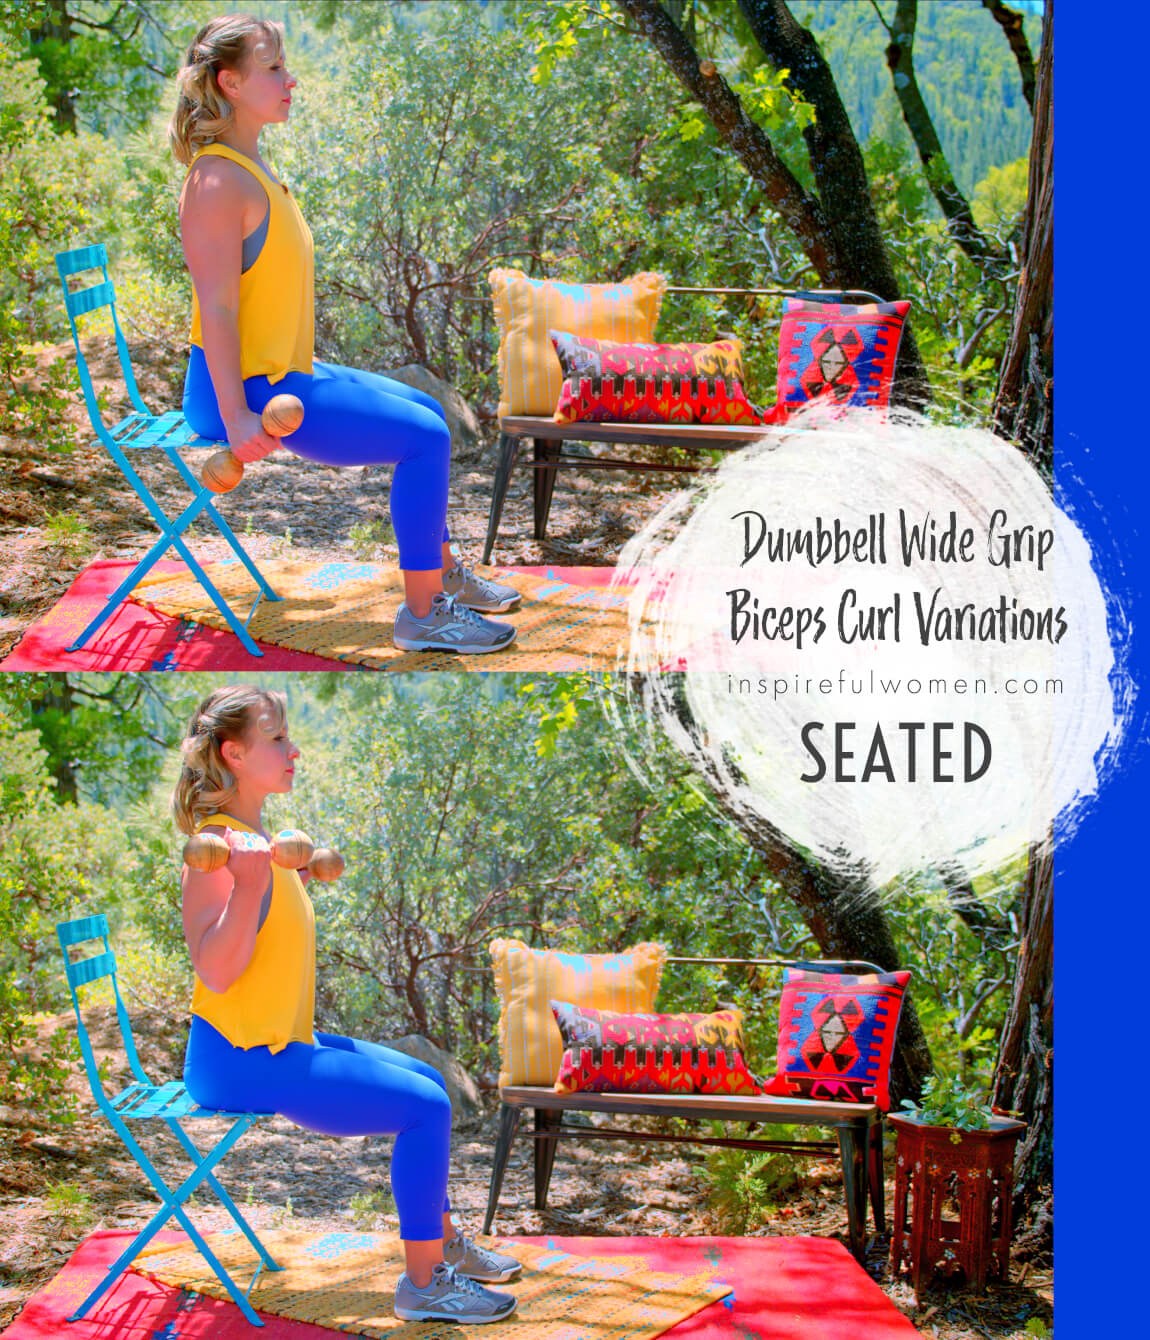 seated-side-wide-grip-bicep-curl-dumbbell-short-head-exercise-variation